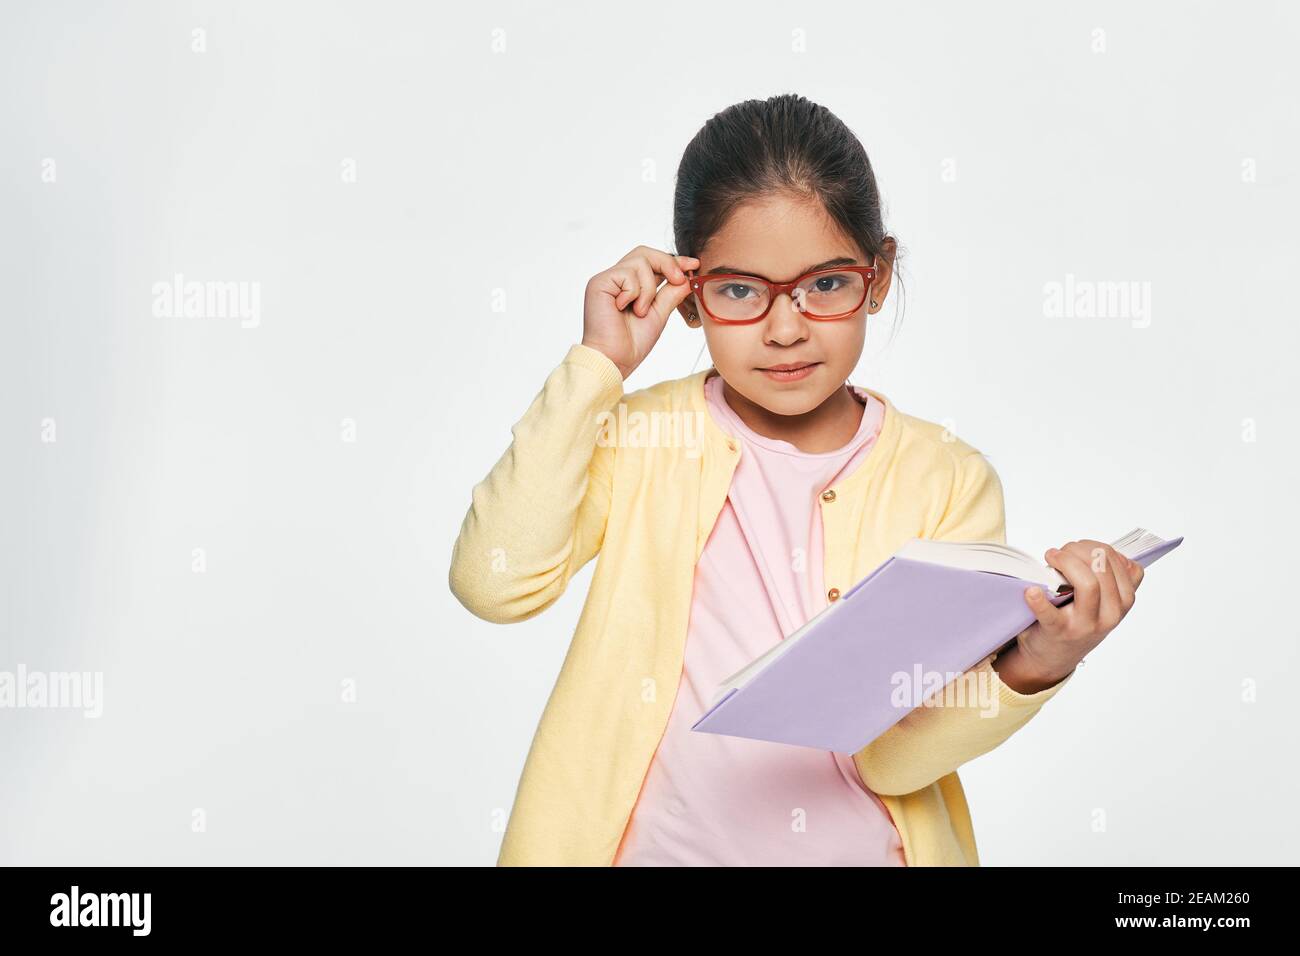 Mixed race little girl wearing eyeglasses holds book looking pensive at camera, on light grey background Stock Photo